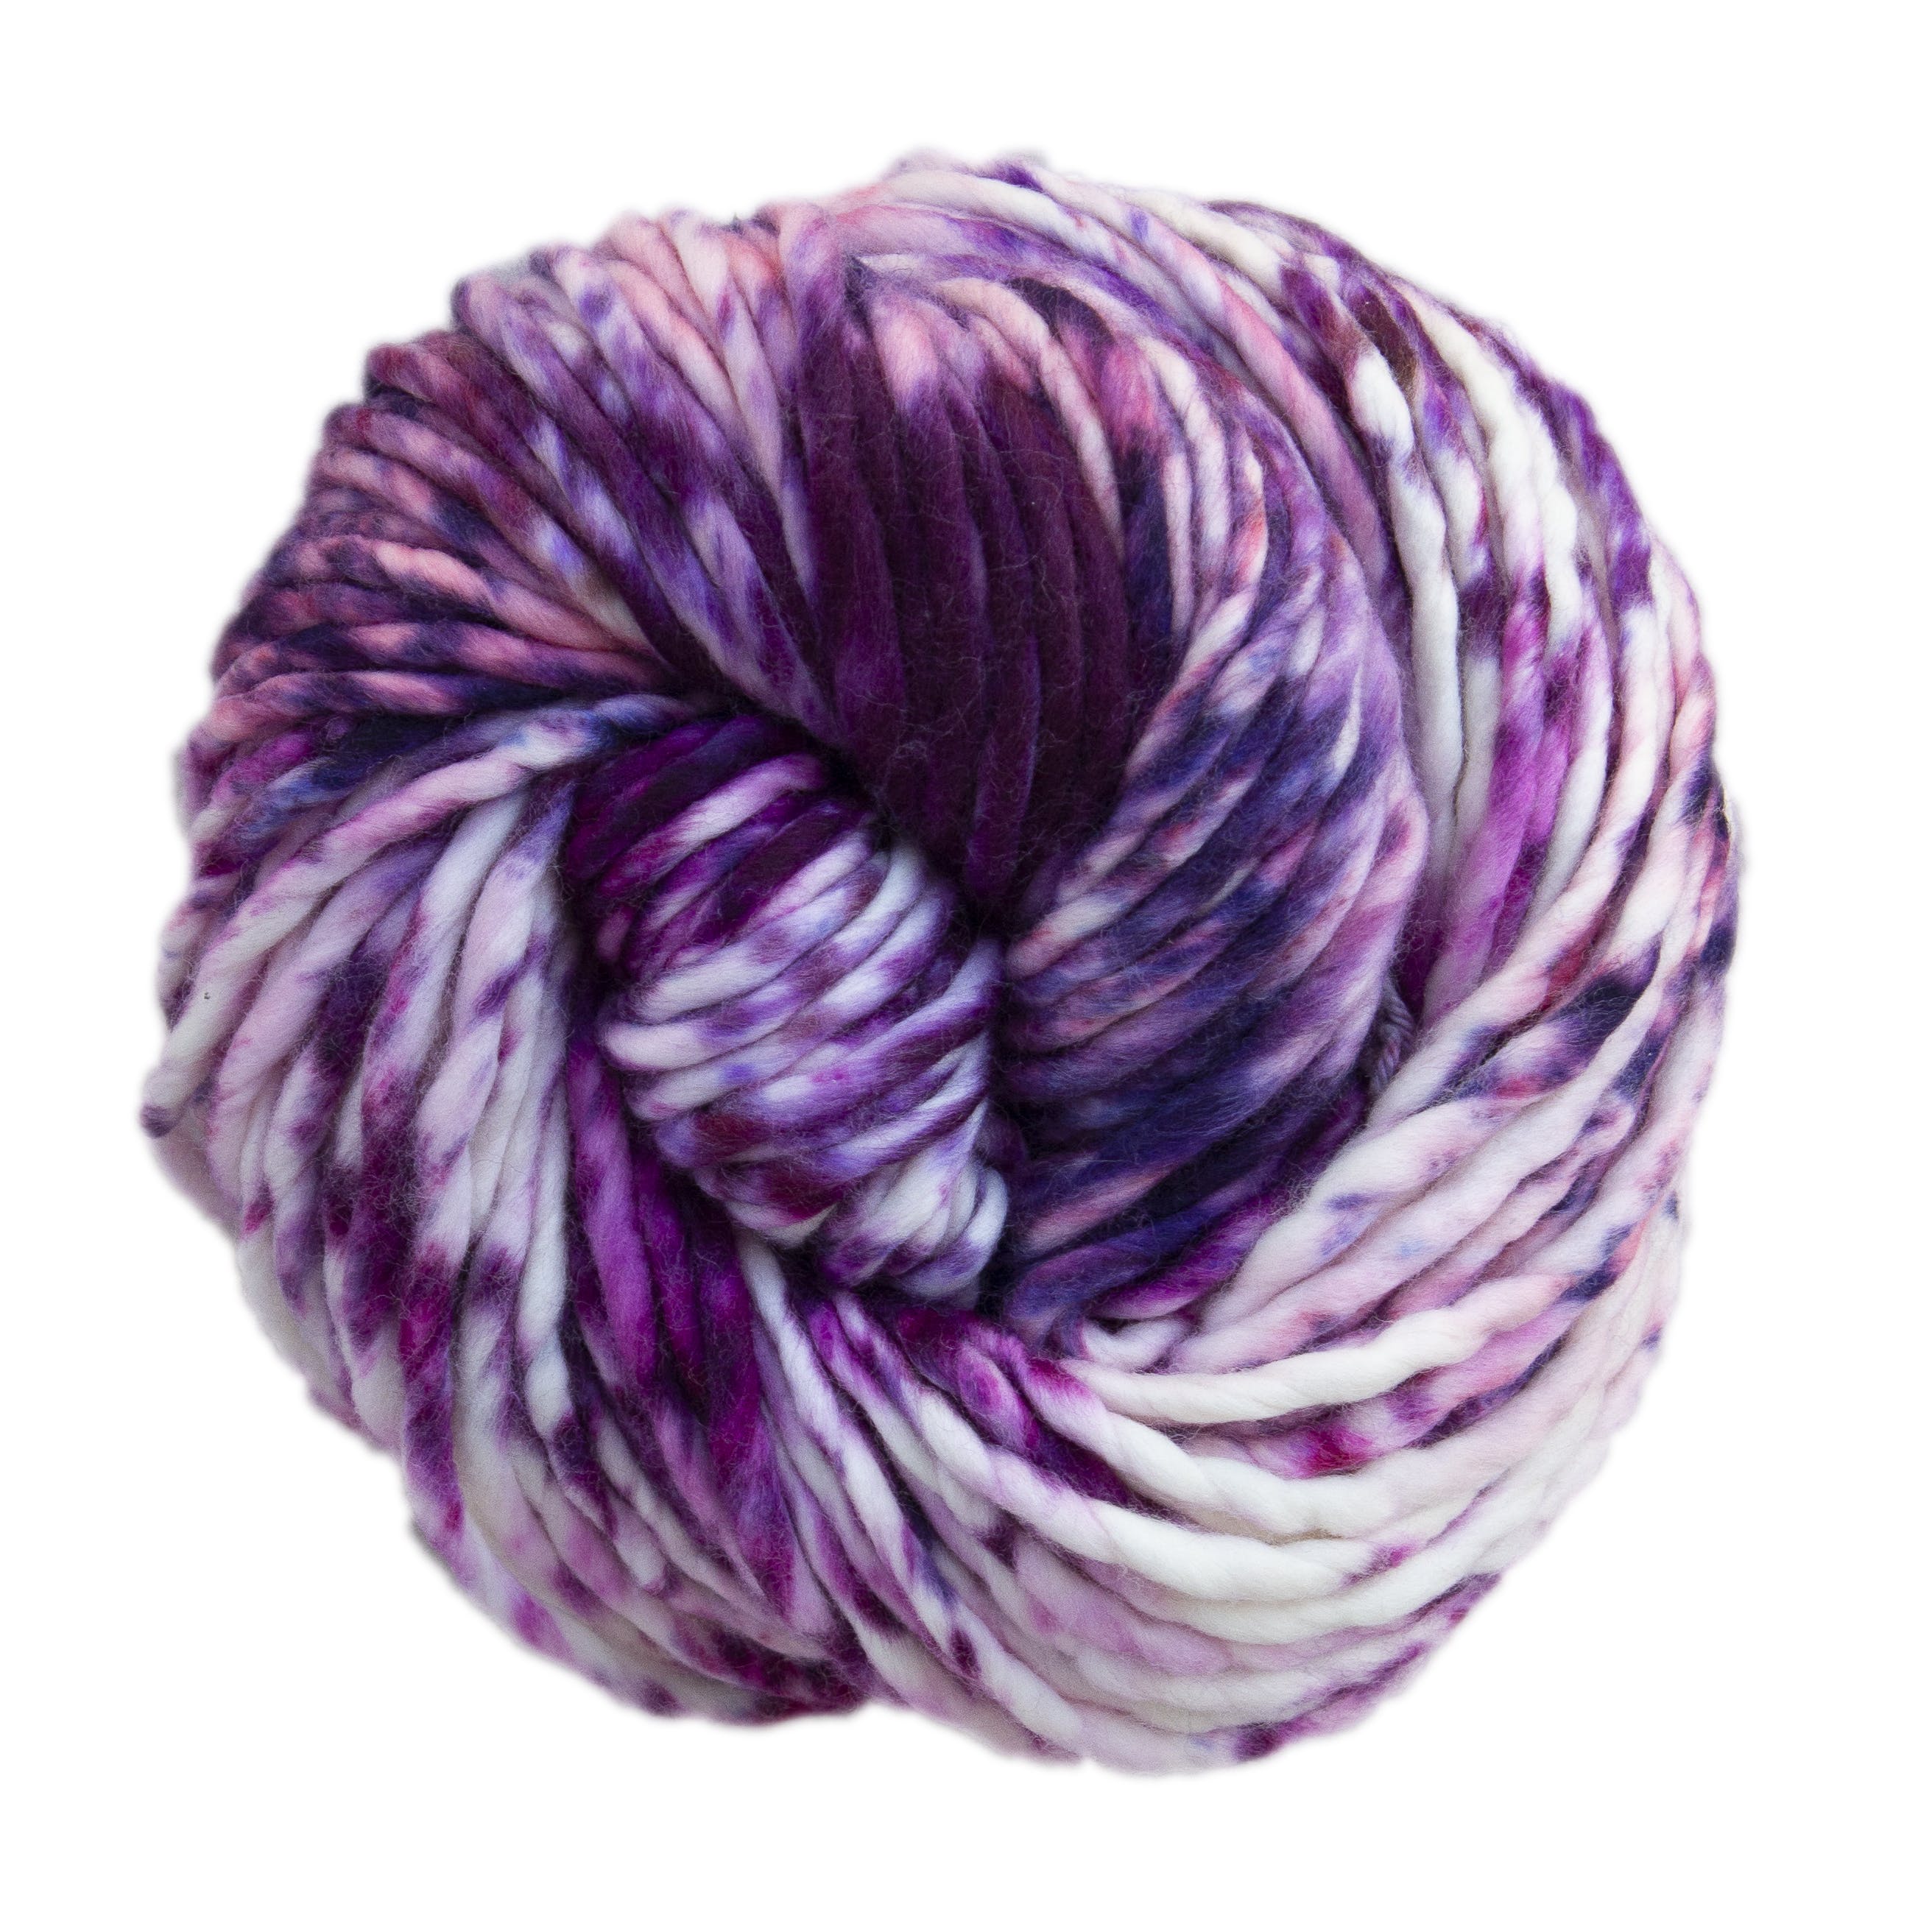 Skein of Malabrigo Rasta Super Bulky weight yarn in the color Blueberry Cream (Purple) for knitting and crocheting.